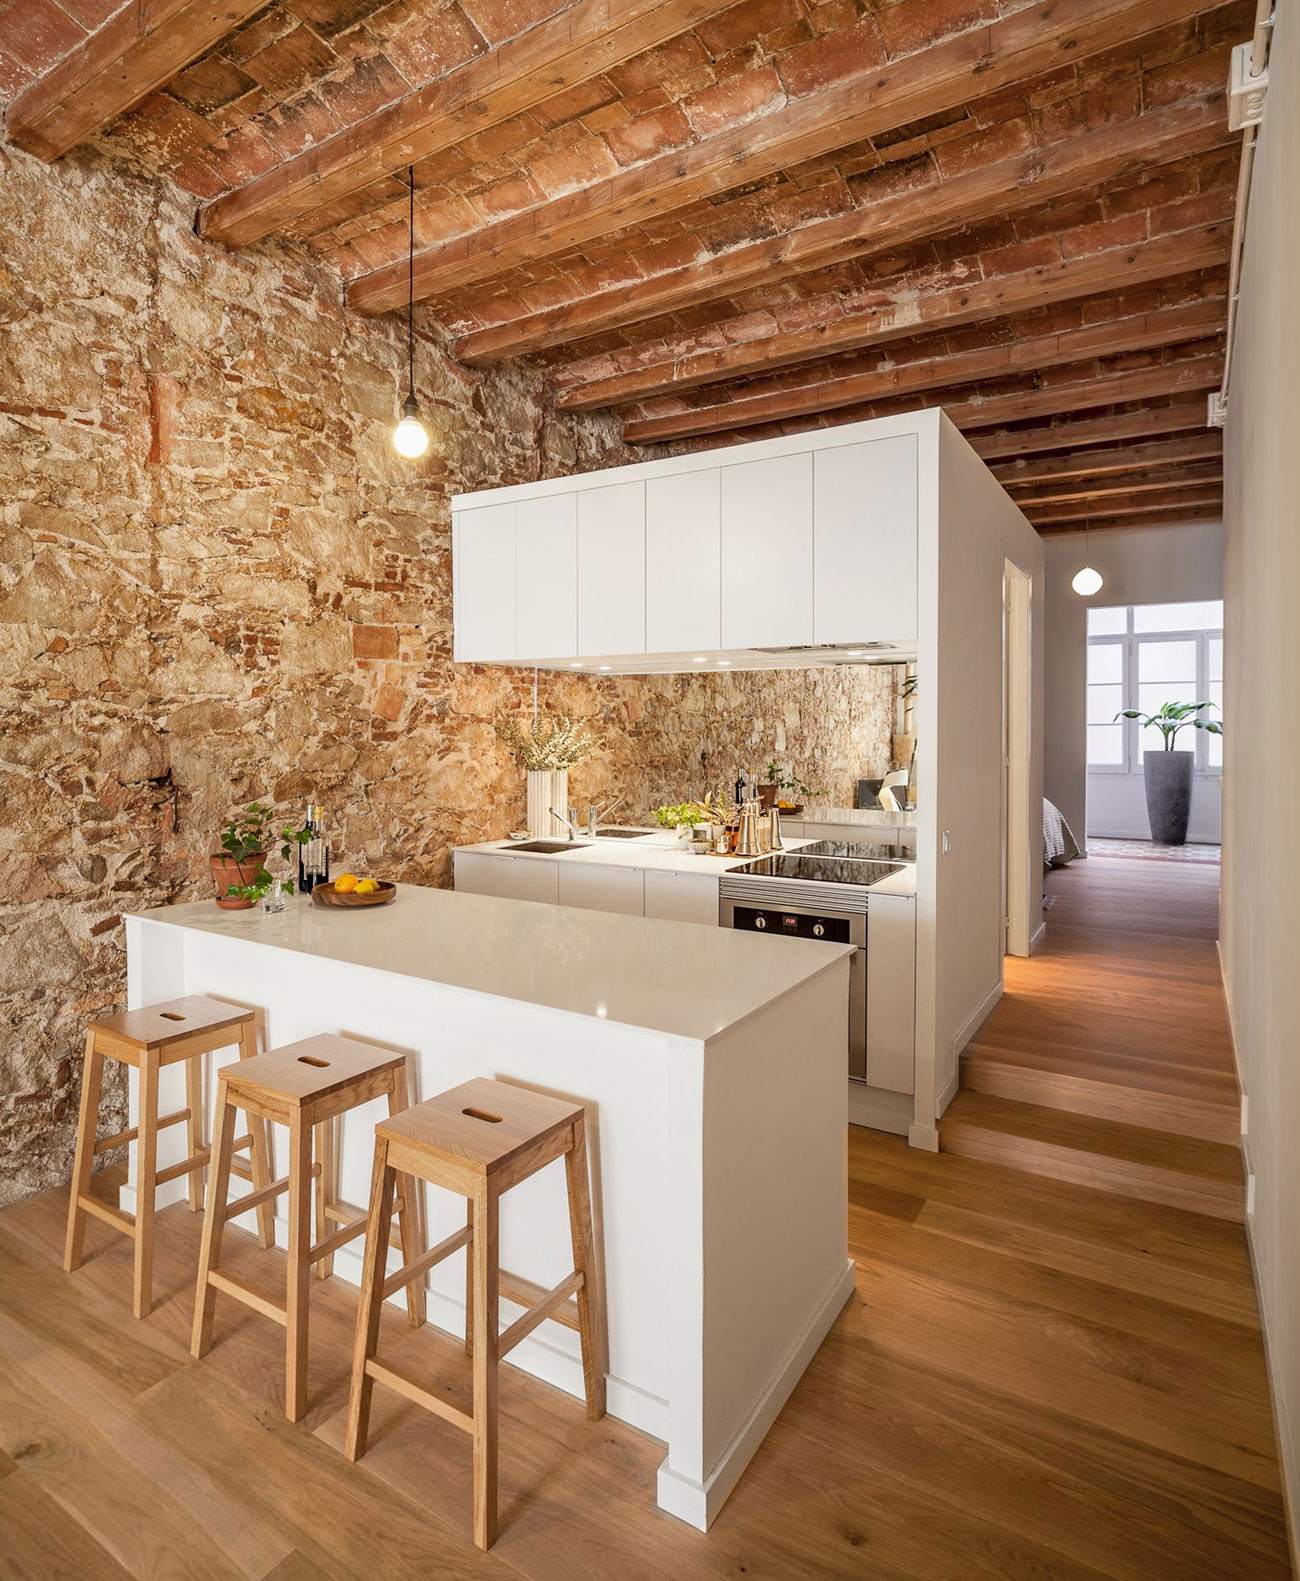 Renovation-Apartment-in-Les-Corts-kitchen-island